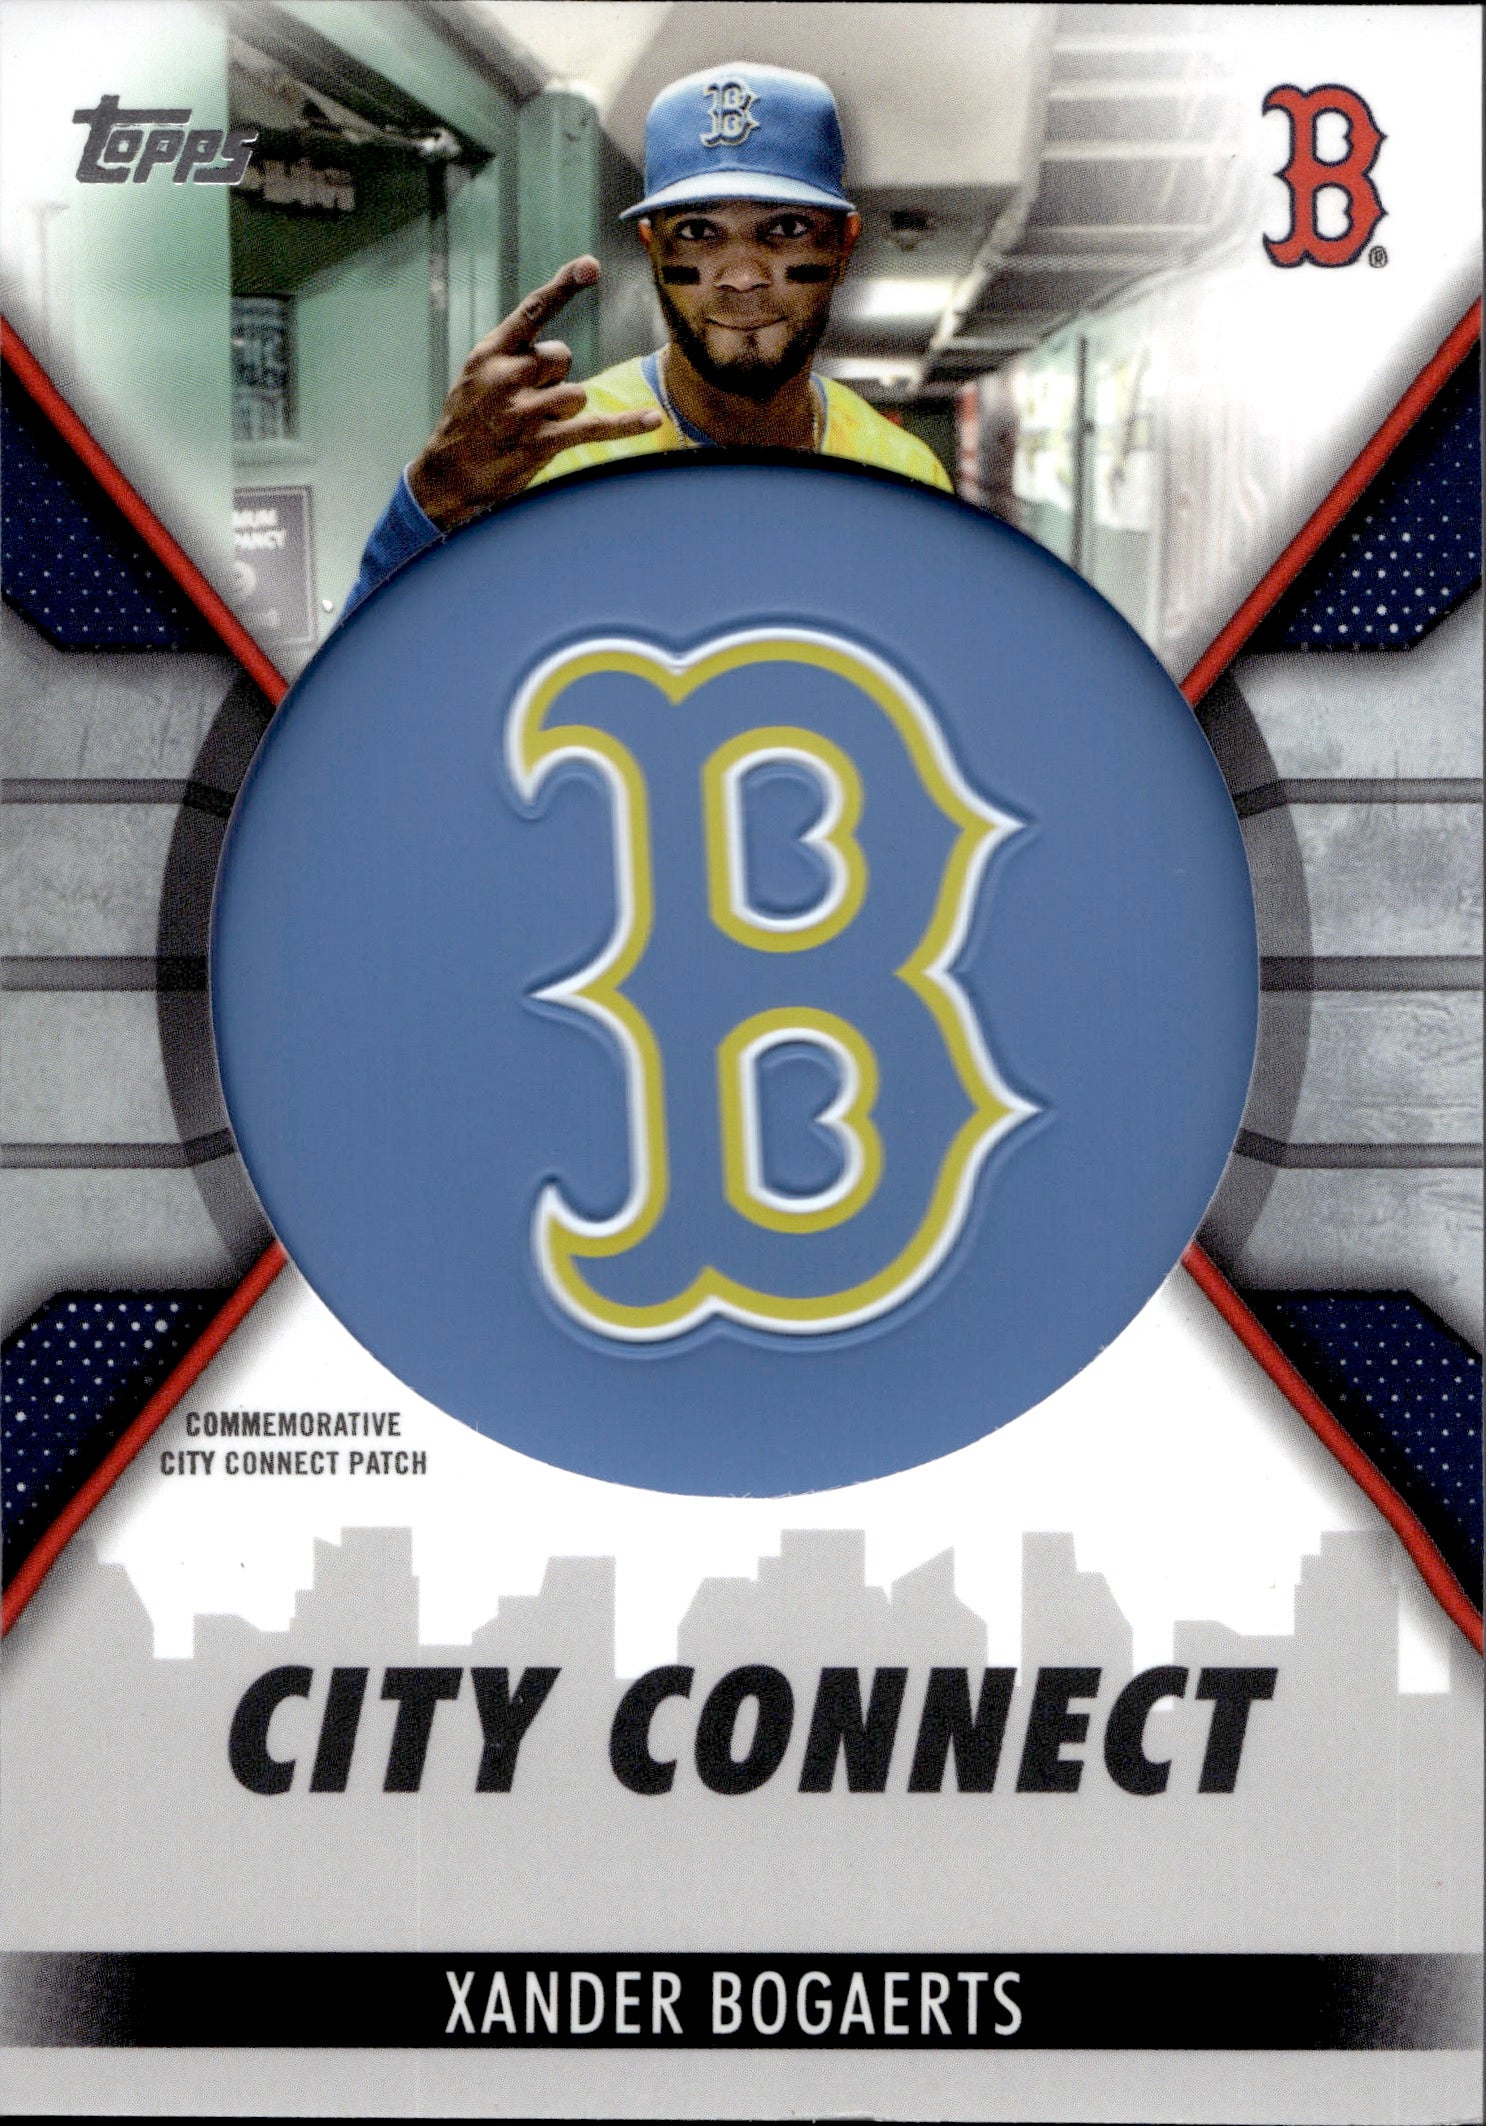 xander bogaerts city connect jersey